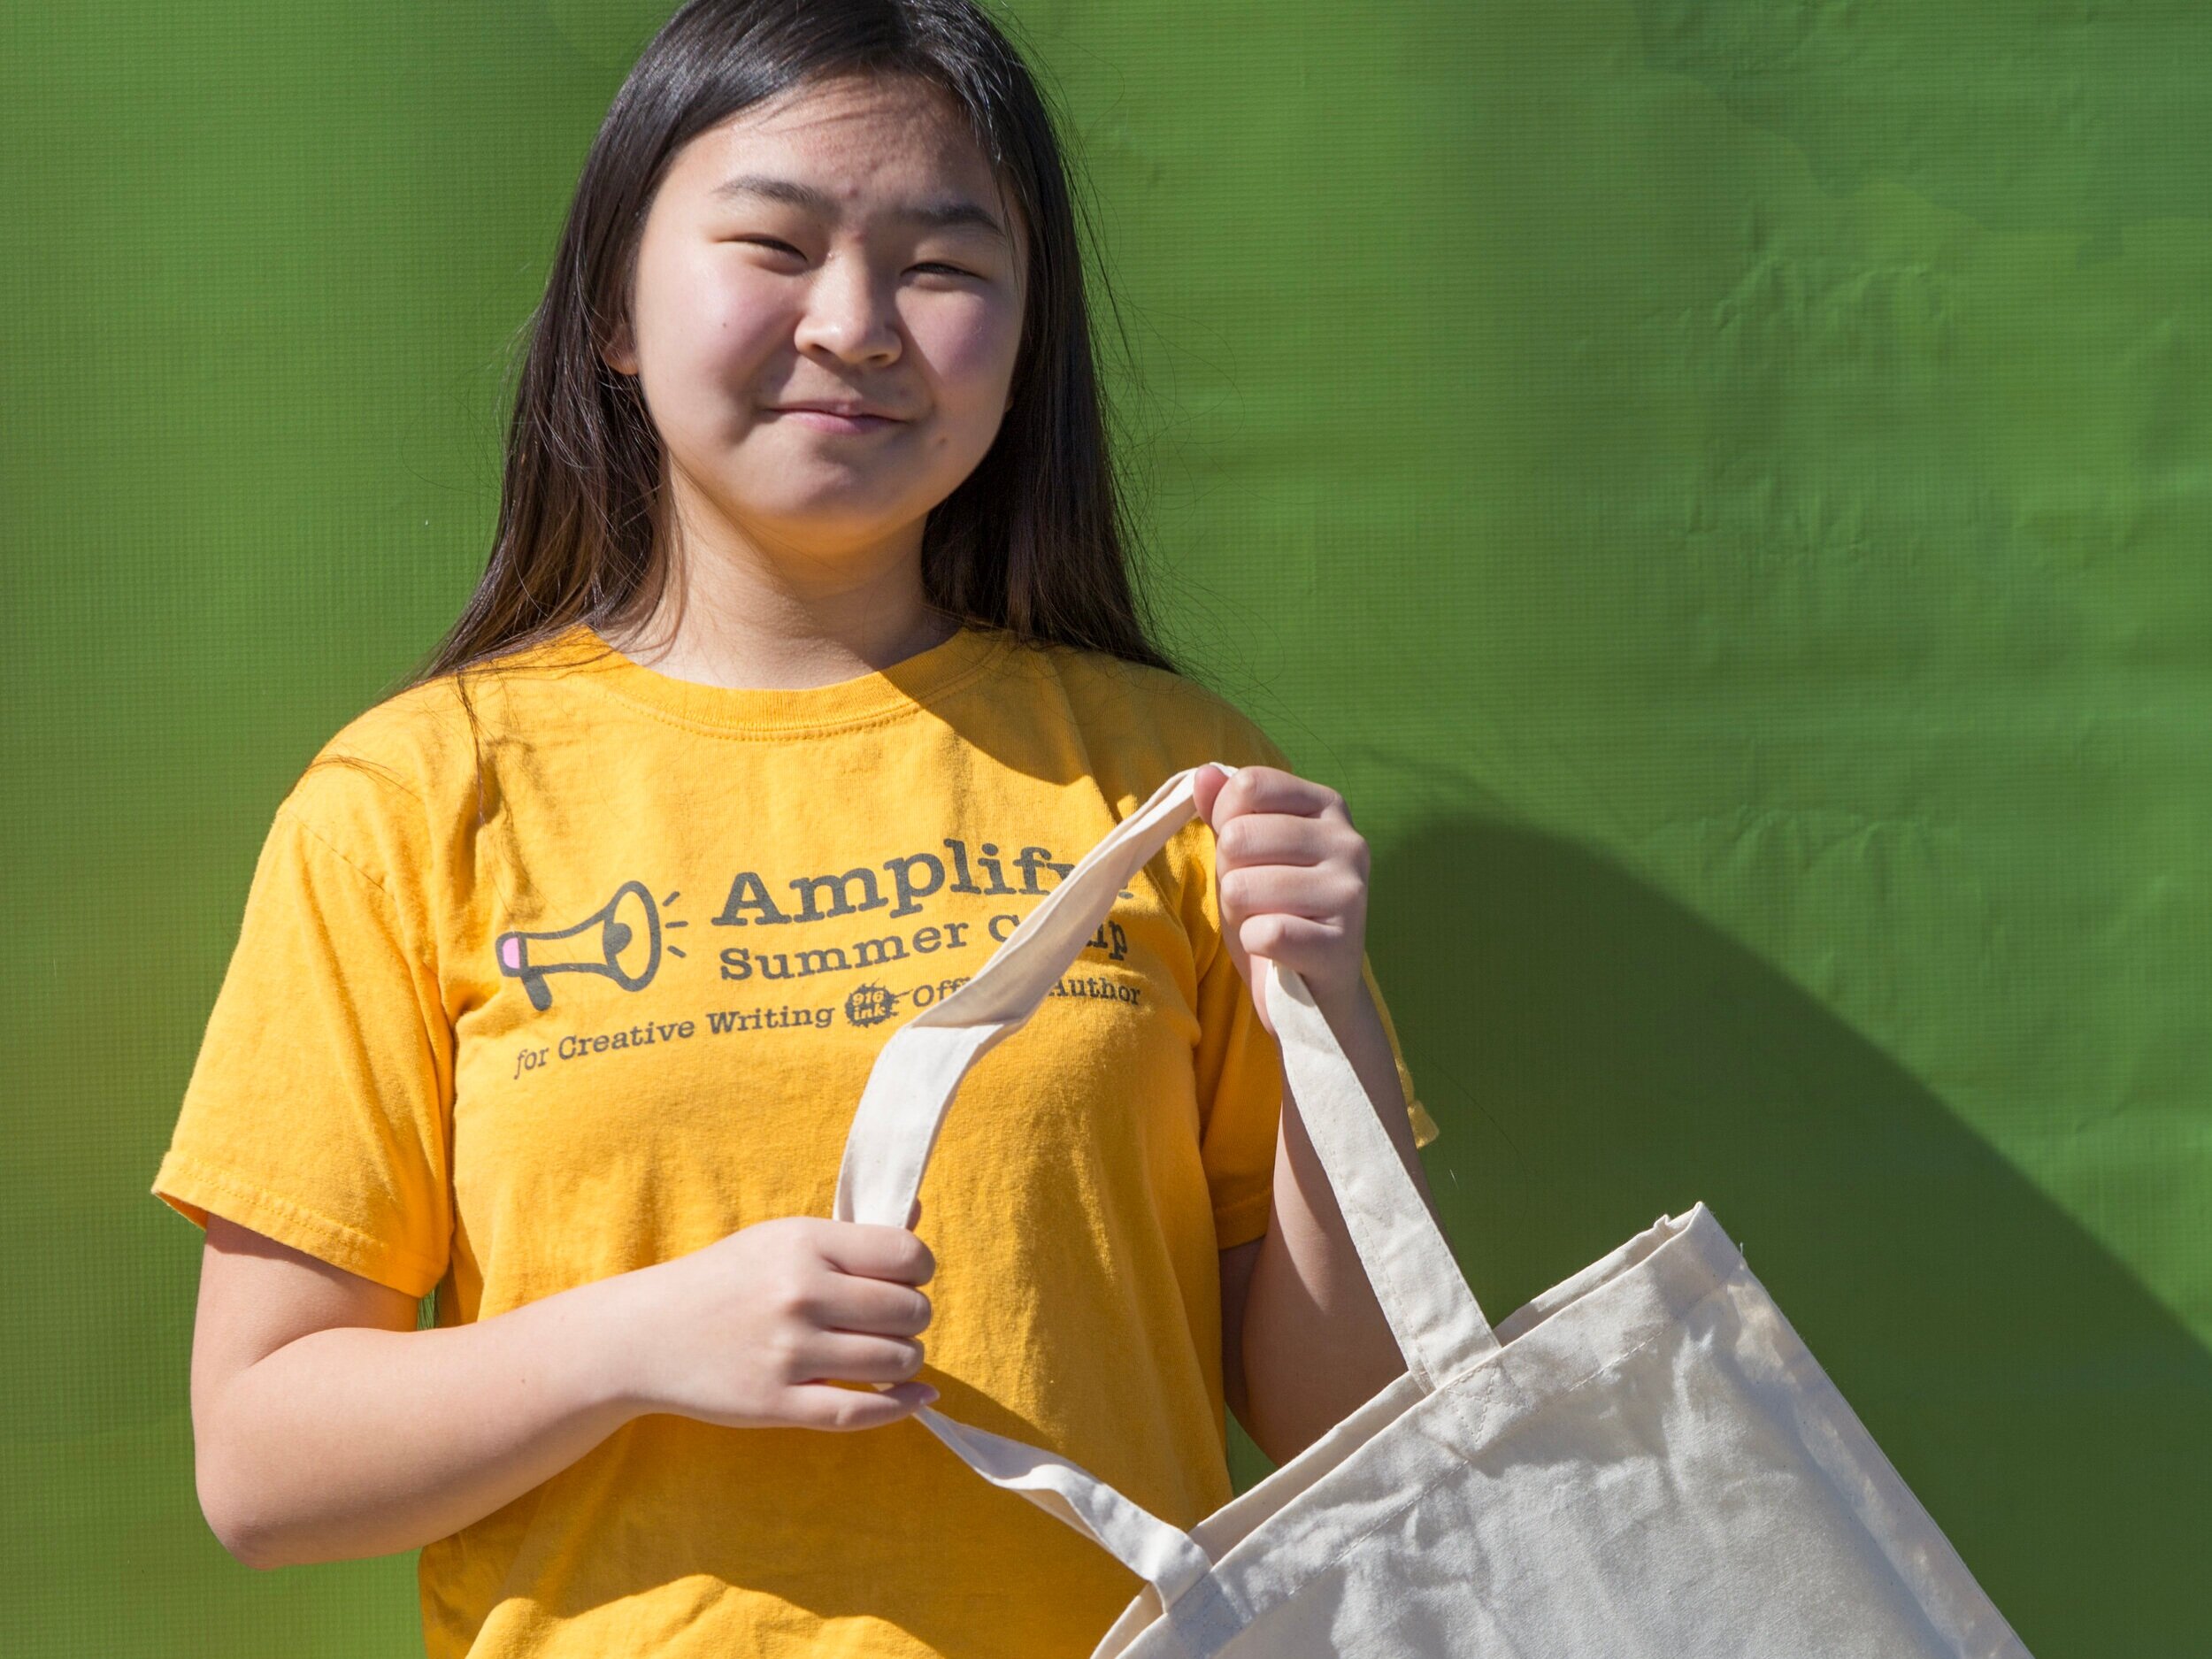 A student from Amplify! Summer Camps is excited to get her tote bag of goodies.